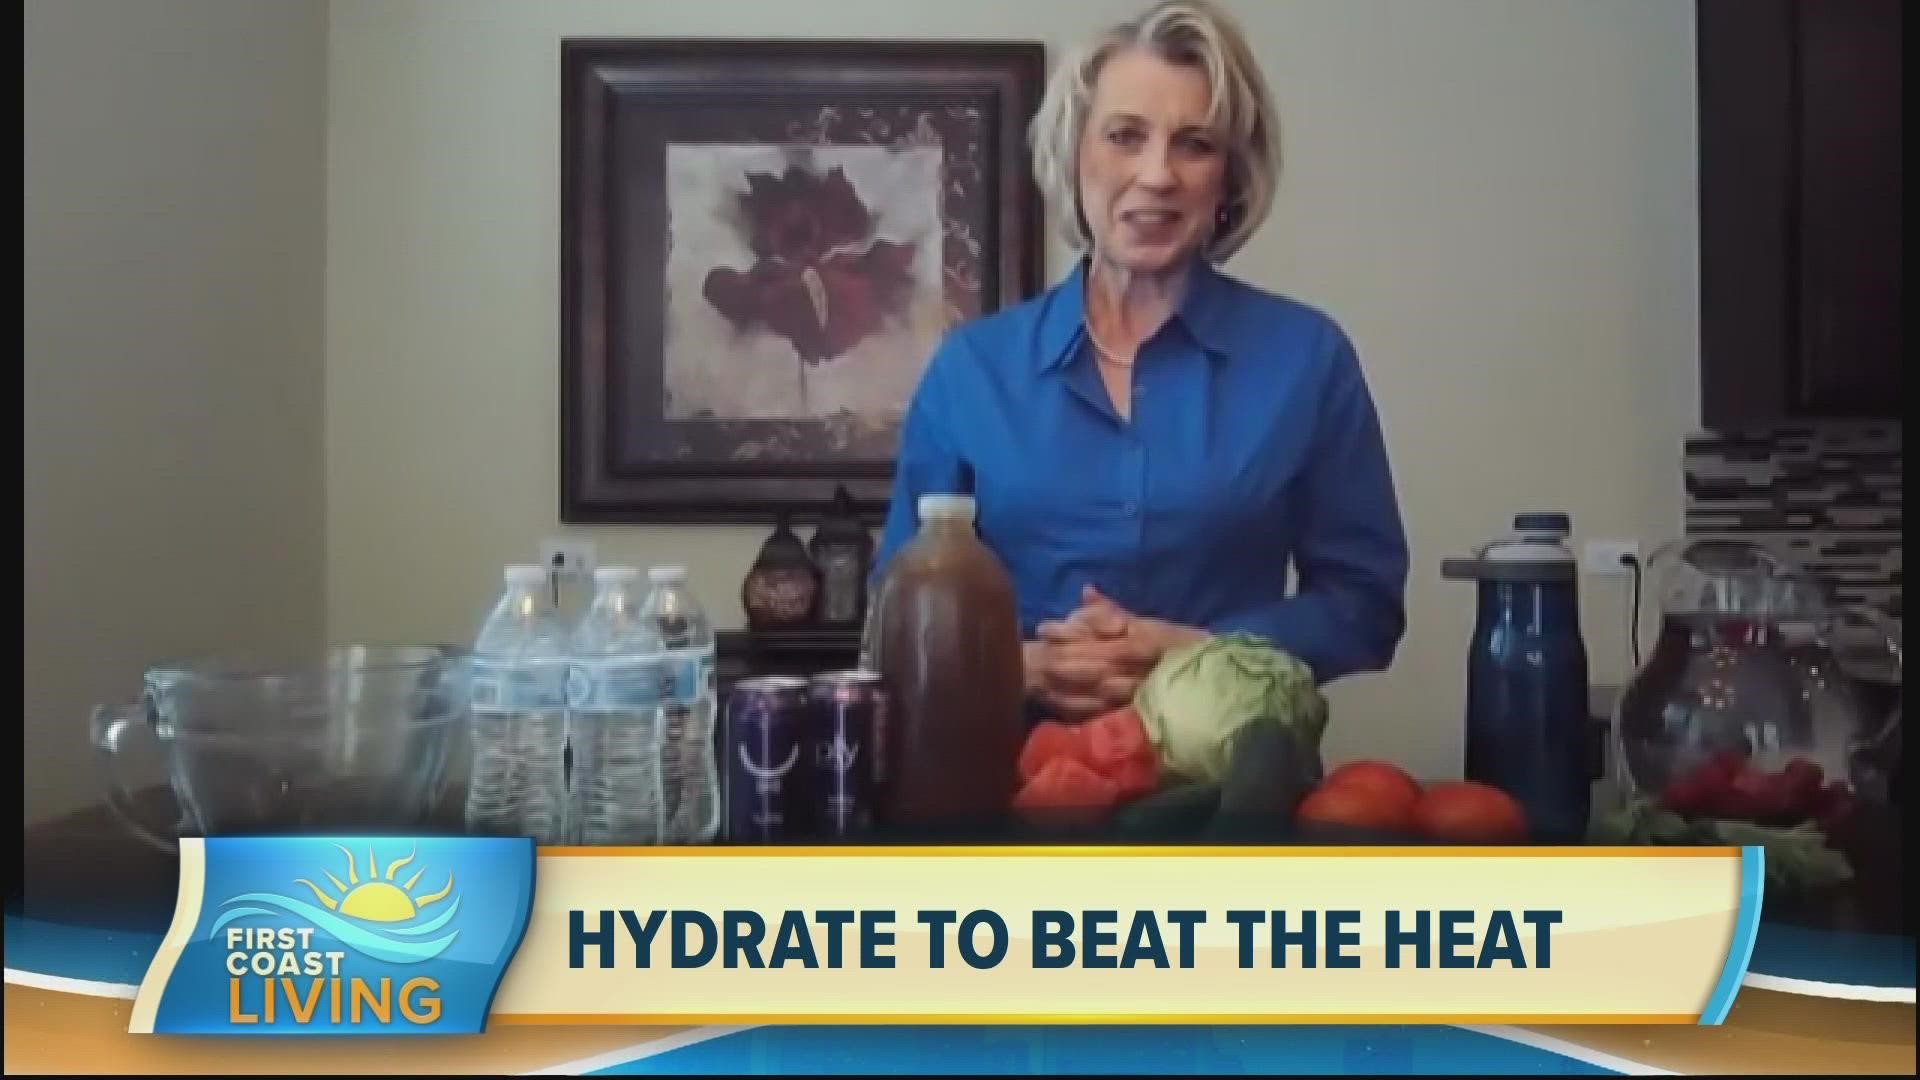 Chair of the Department of Nutrition and Dietetics at UNF, Dr. Lauri Wright shares some fun, creative ideas for keeping healthy and hydrated all summer.